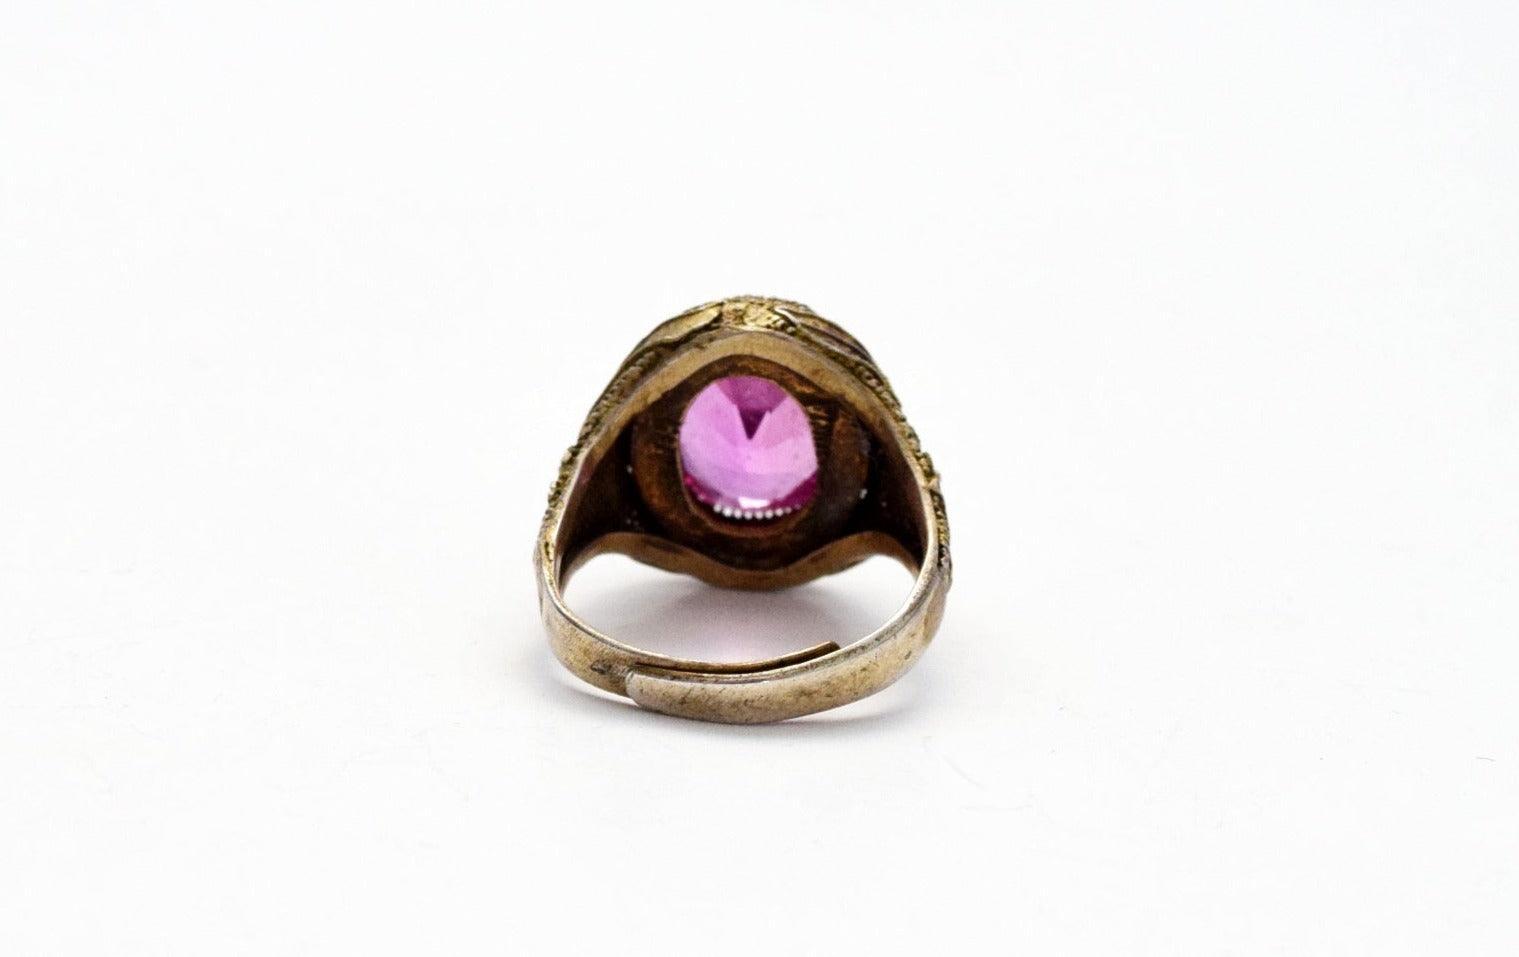 Adjustable Chinese ring